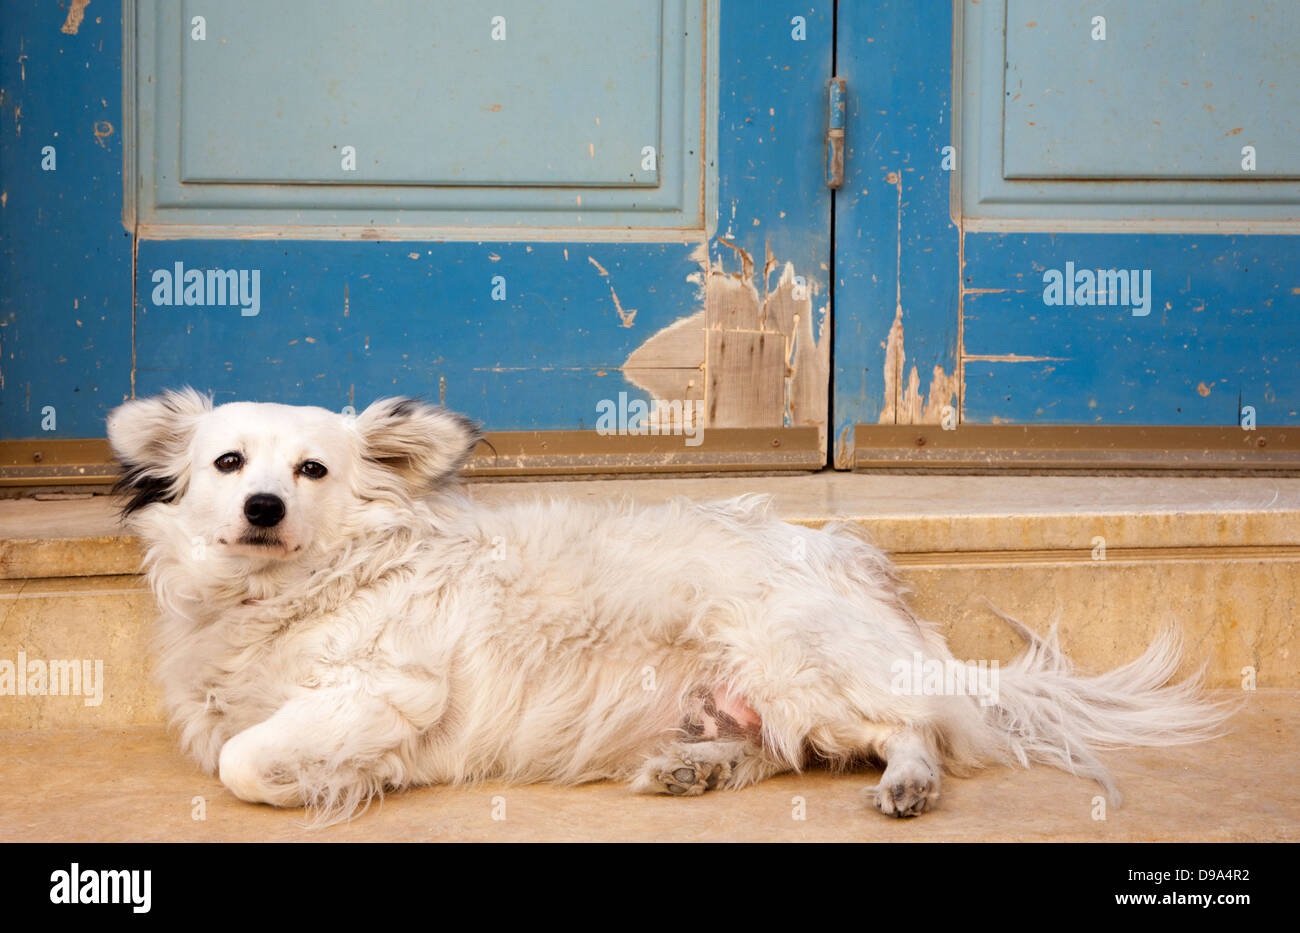 Cute white dog in old town Chania on the Mediterranean island of Crete, Greece Stock Photo